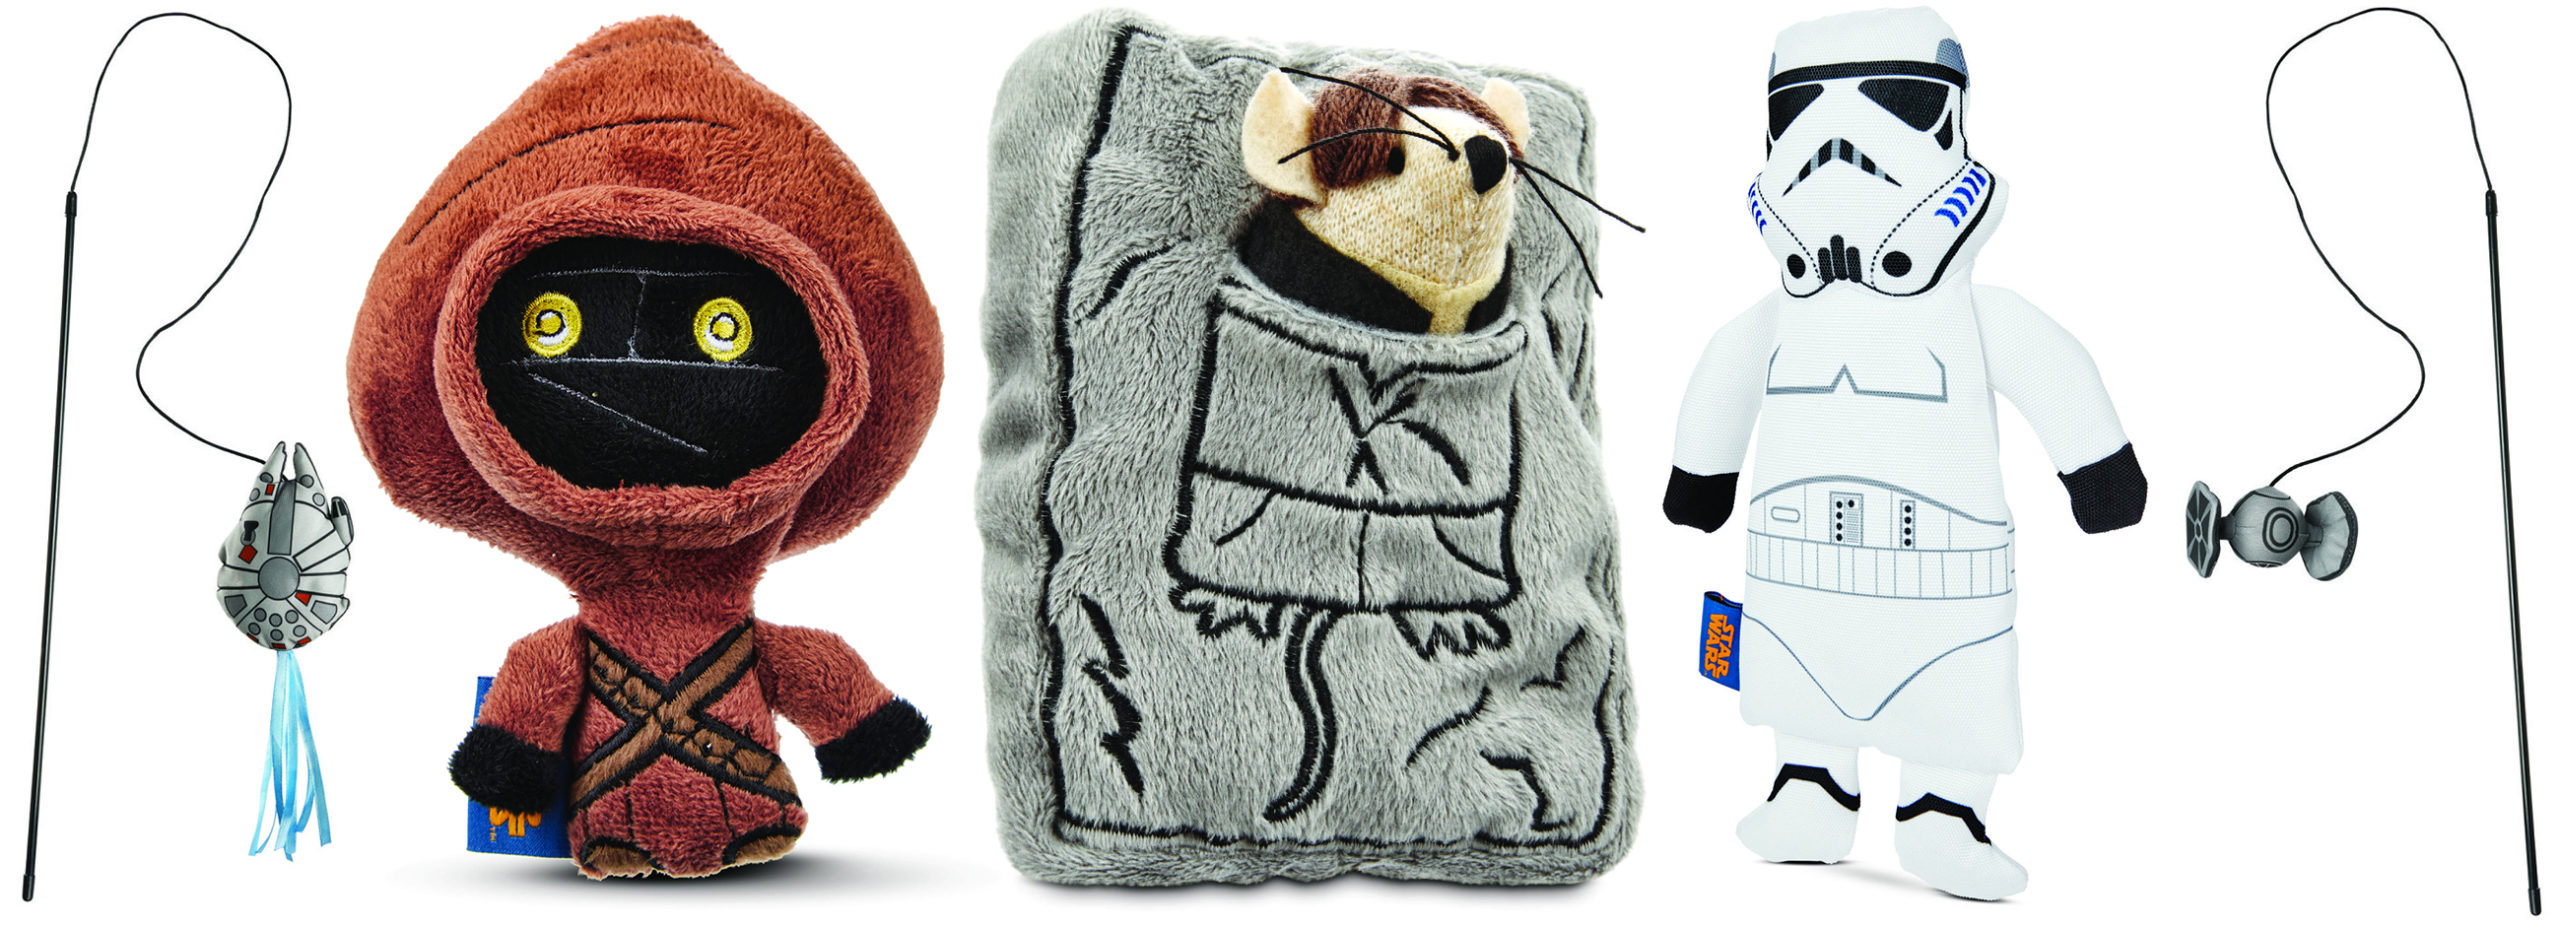 You’ll Want These Star Wars Dog And Cat Toys More Than Your Pets Do